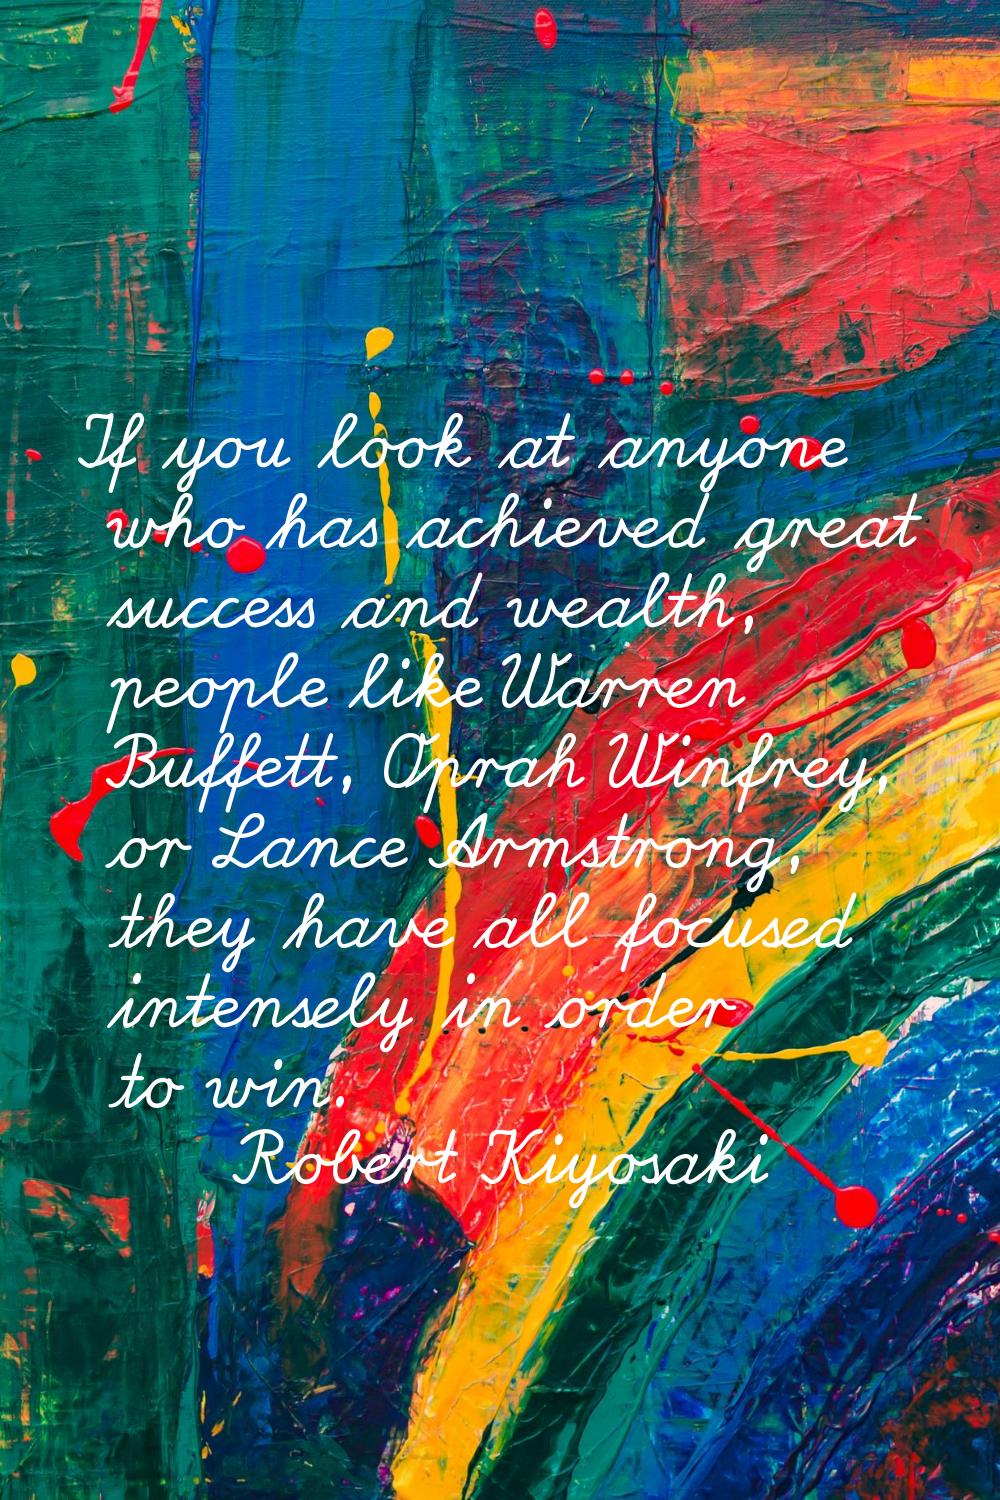 If you look at anyone who has achieved great success and wealth, people like Warren Buffett, Oprah 